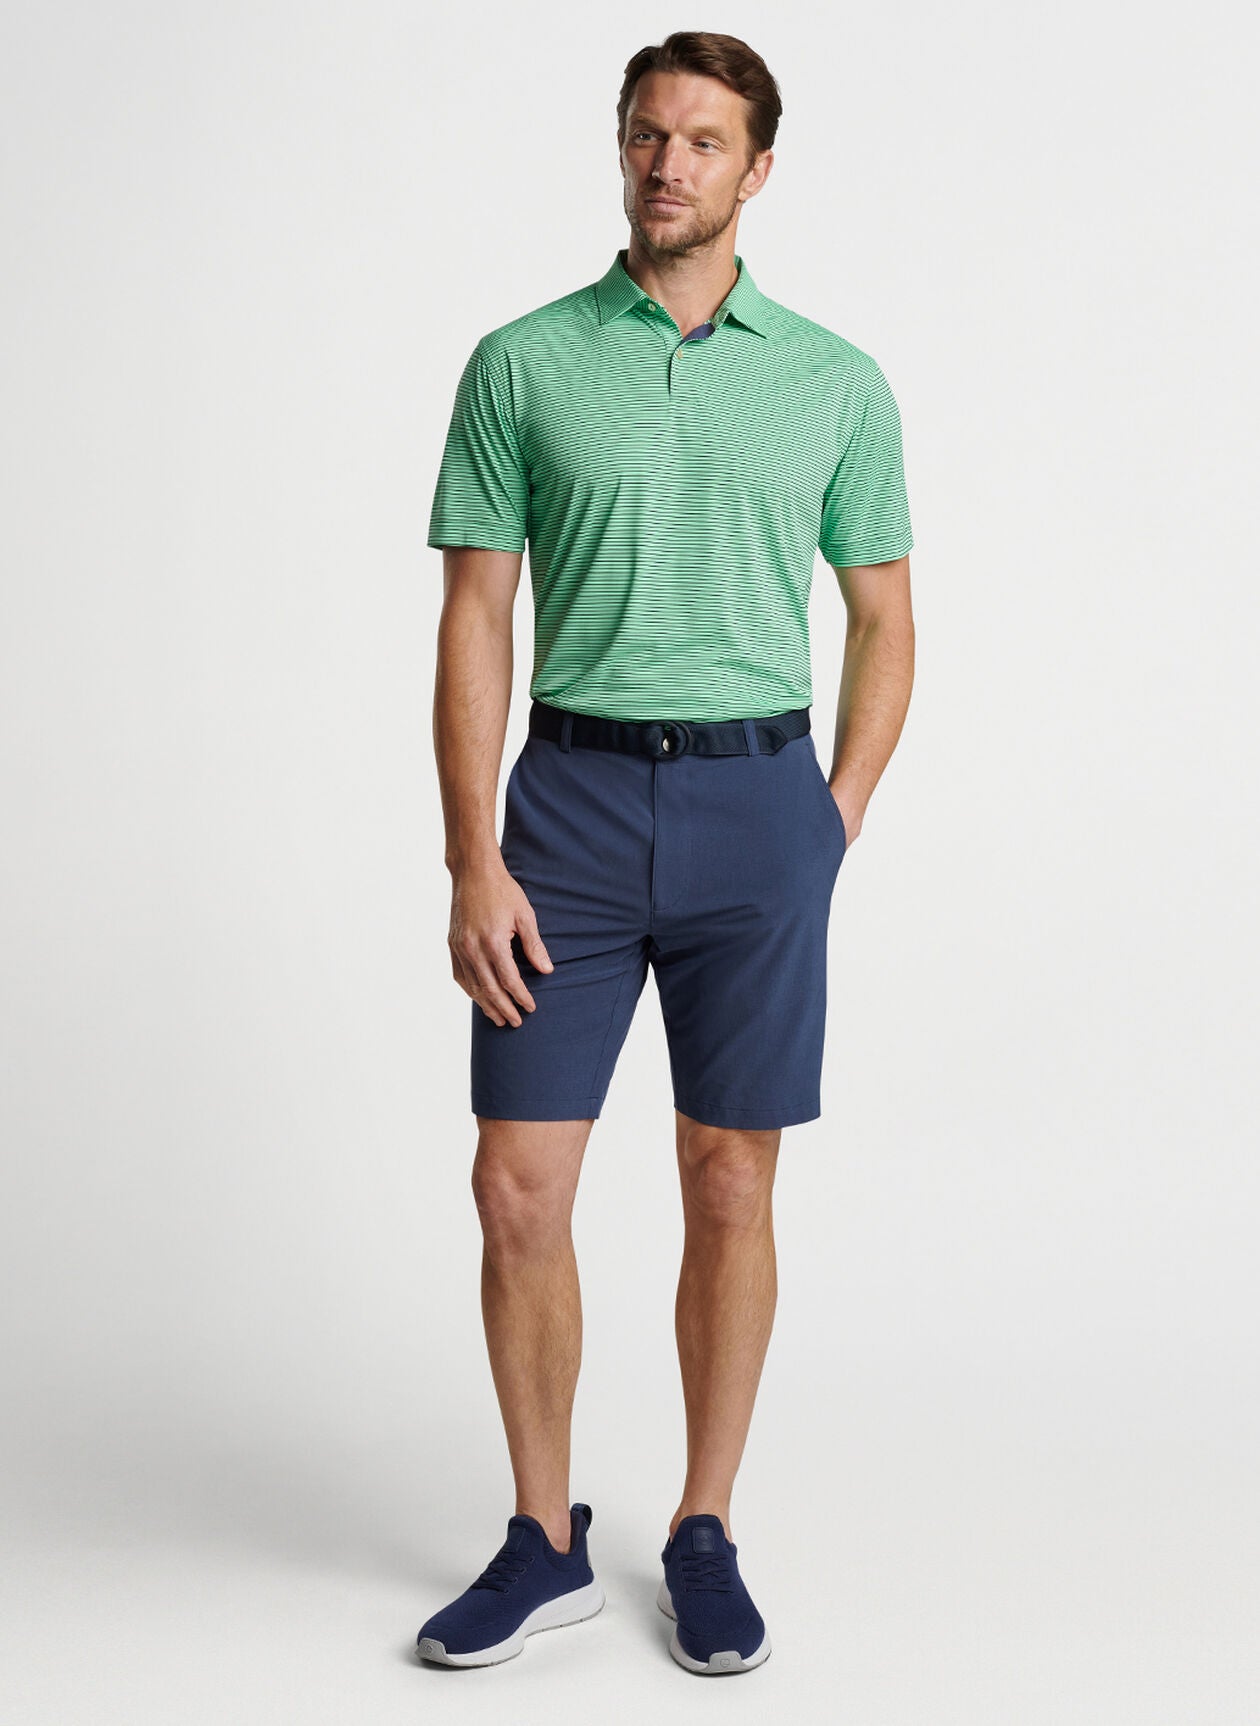 Featherweight Performance Stripe Polo - Summer Meadow